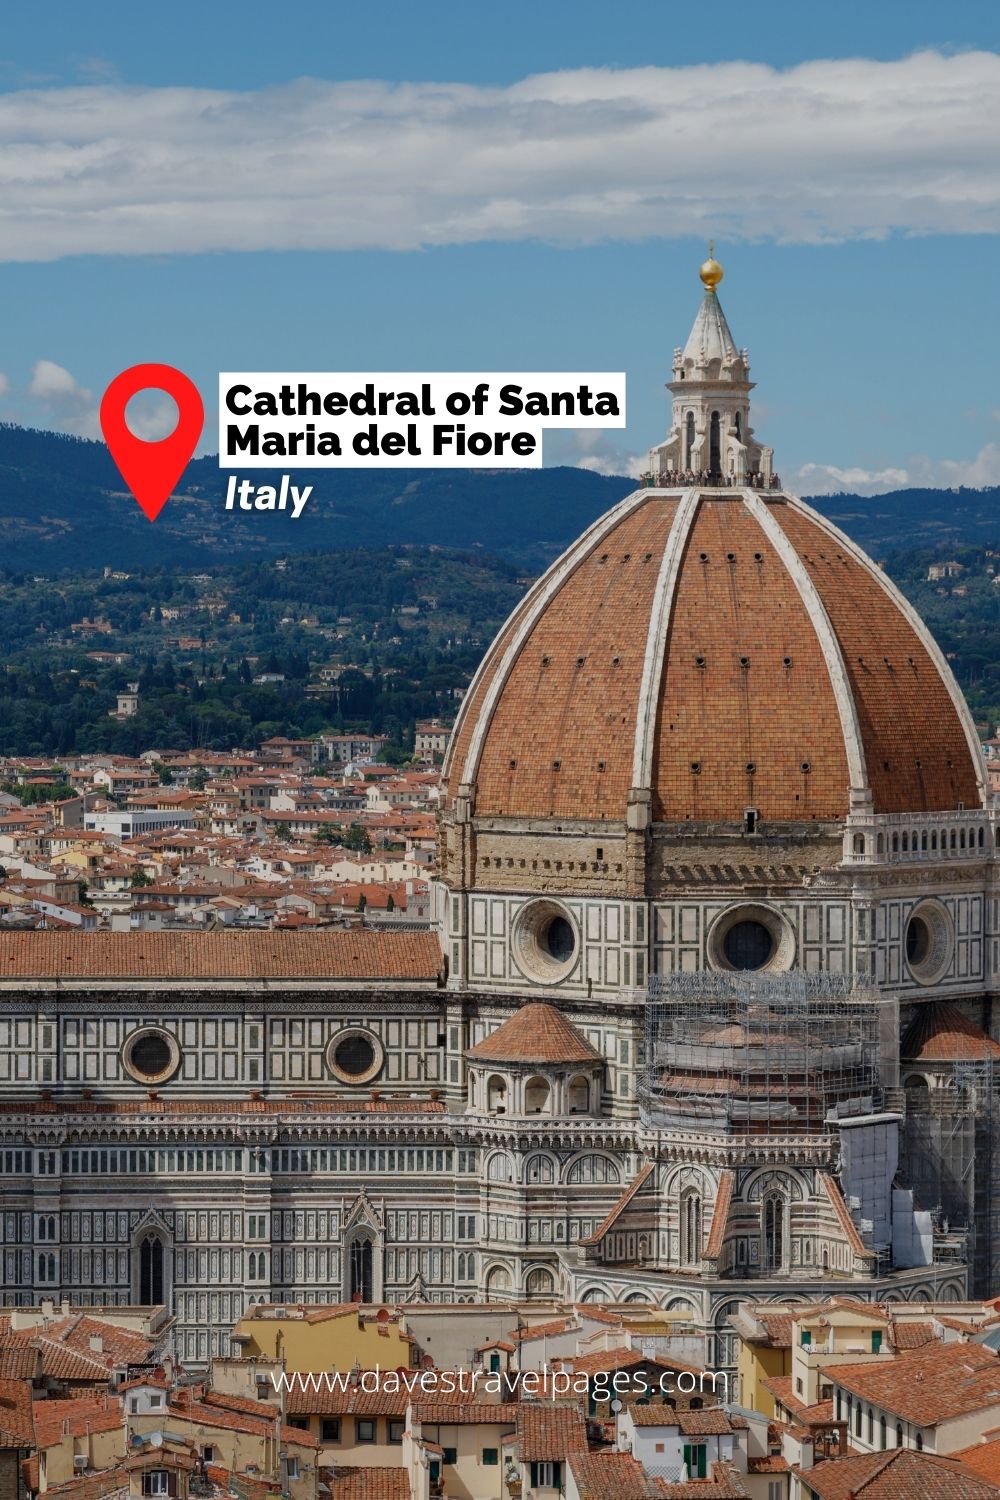 Cathedral of Santa Maria del Fiore is one of the European famous landmarks